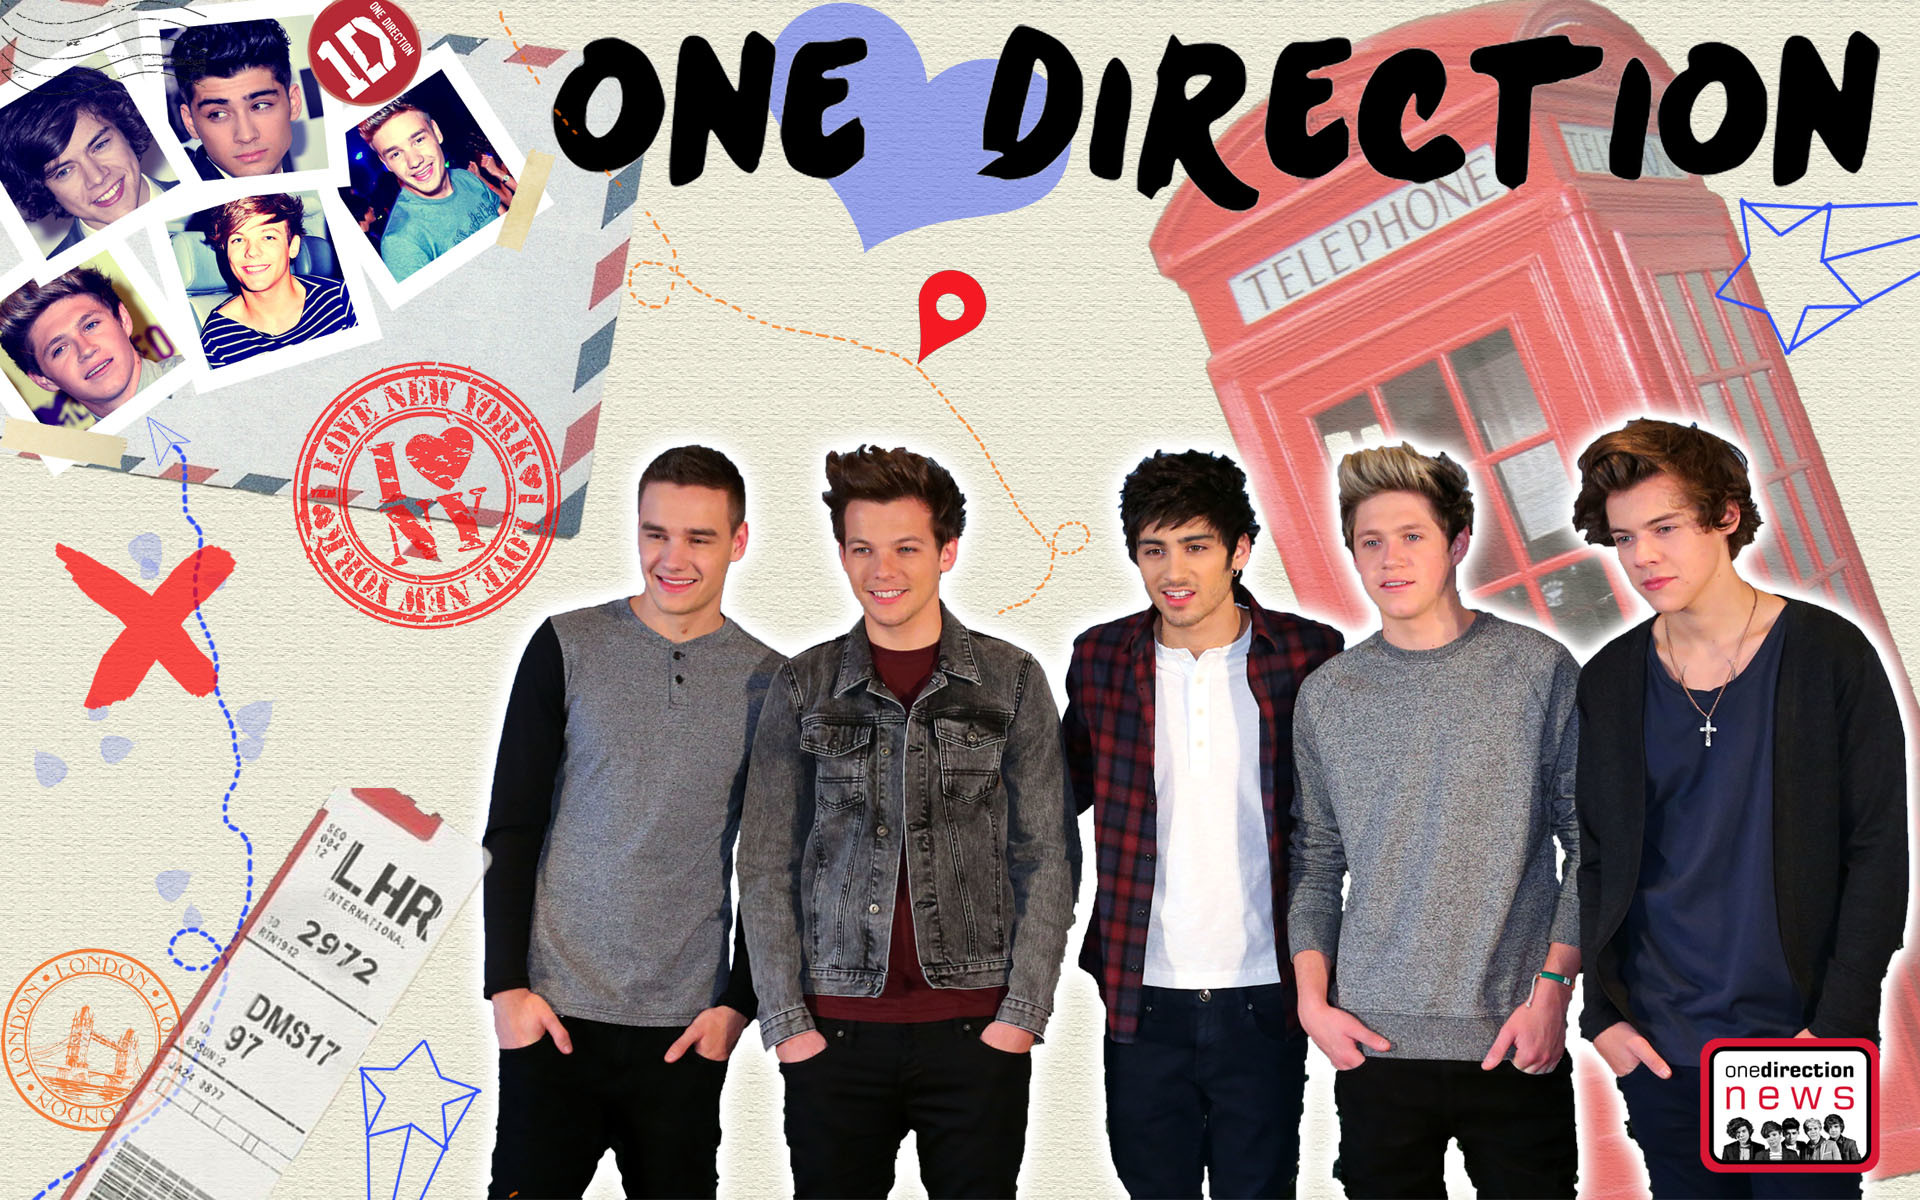 1920x1200 One Direction Wallpaper Background.